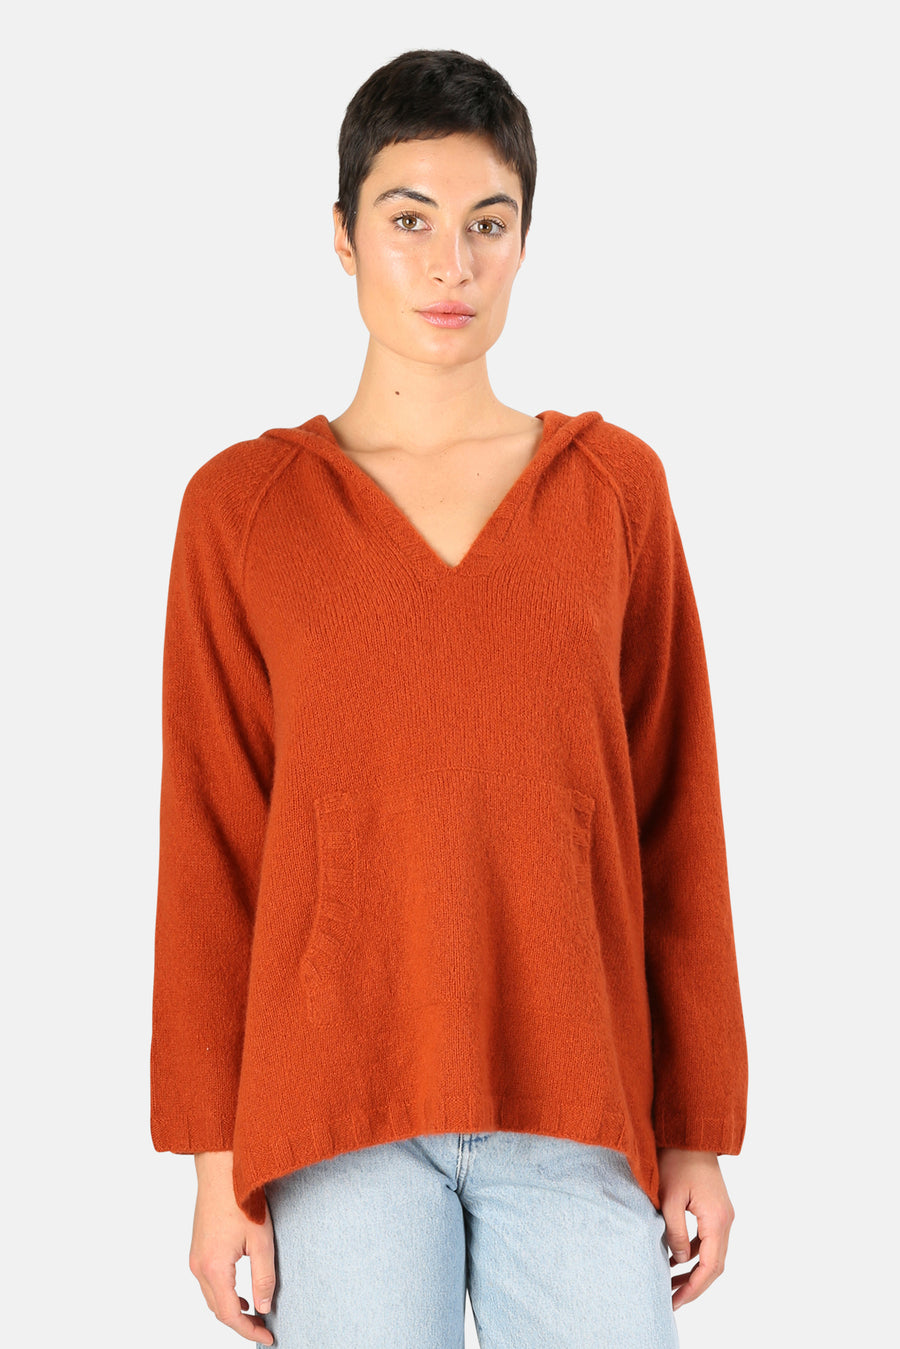 Hooded Cashmere Pullover Poncho Harvest - blueandcream